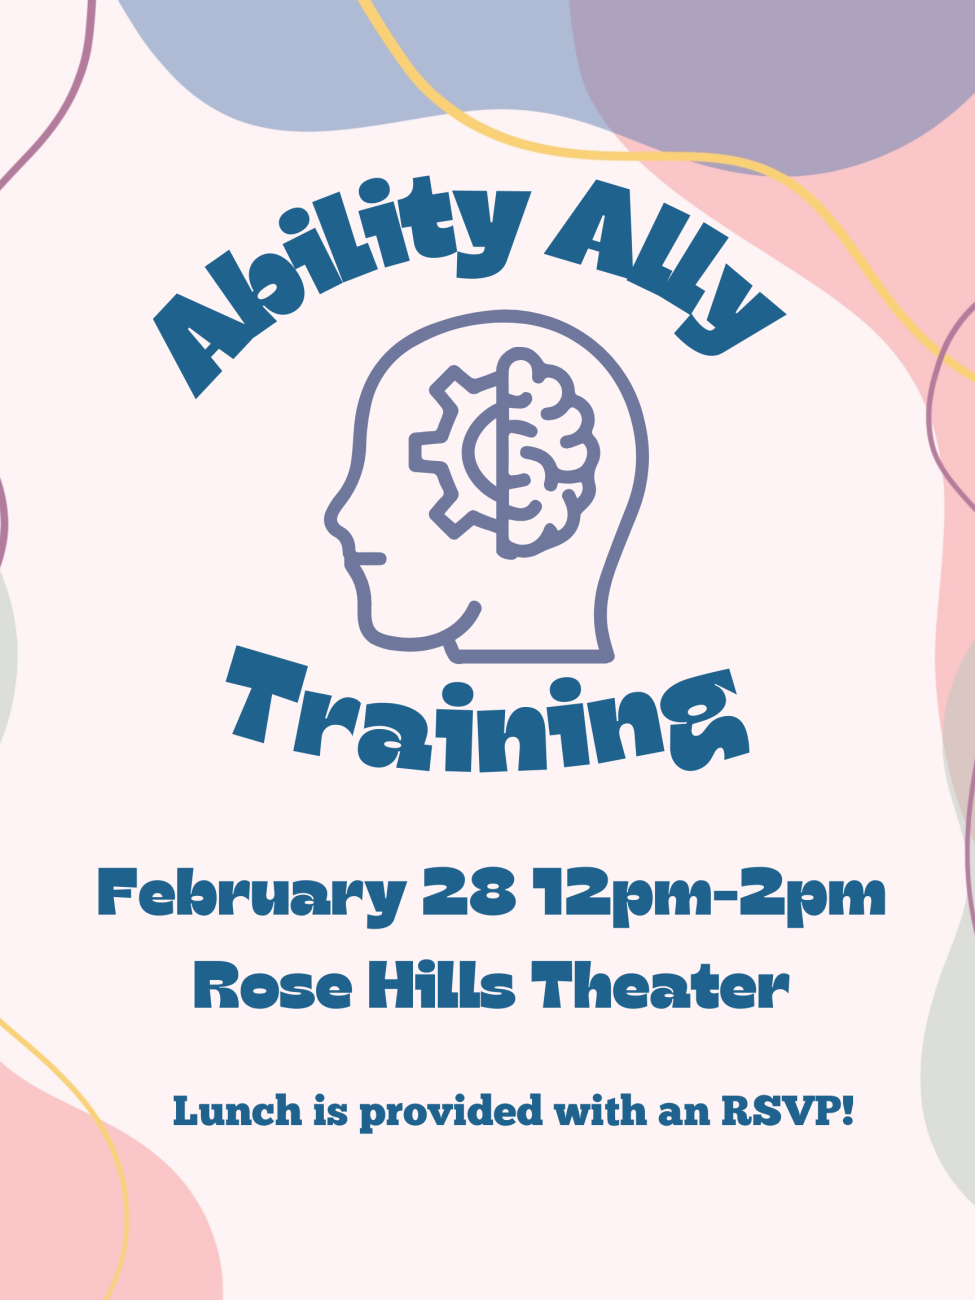 Flyer for Ability Ally Training showing the time, date, location, and an image of a brain.